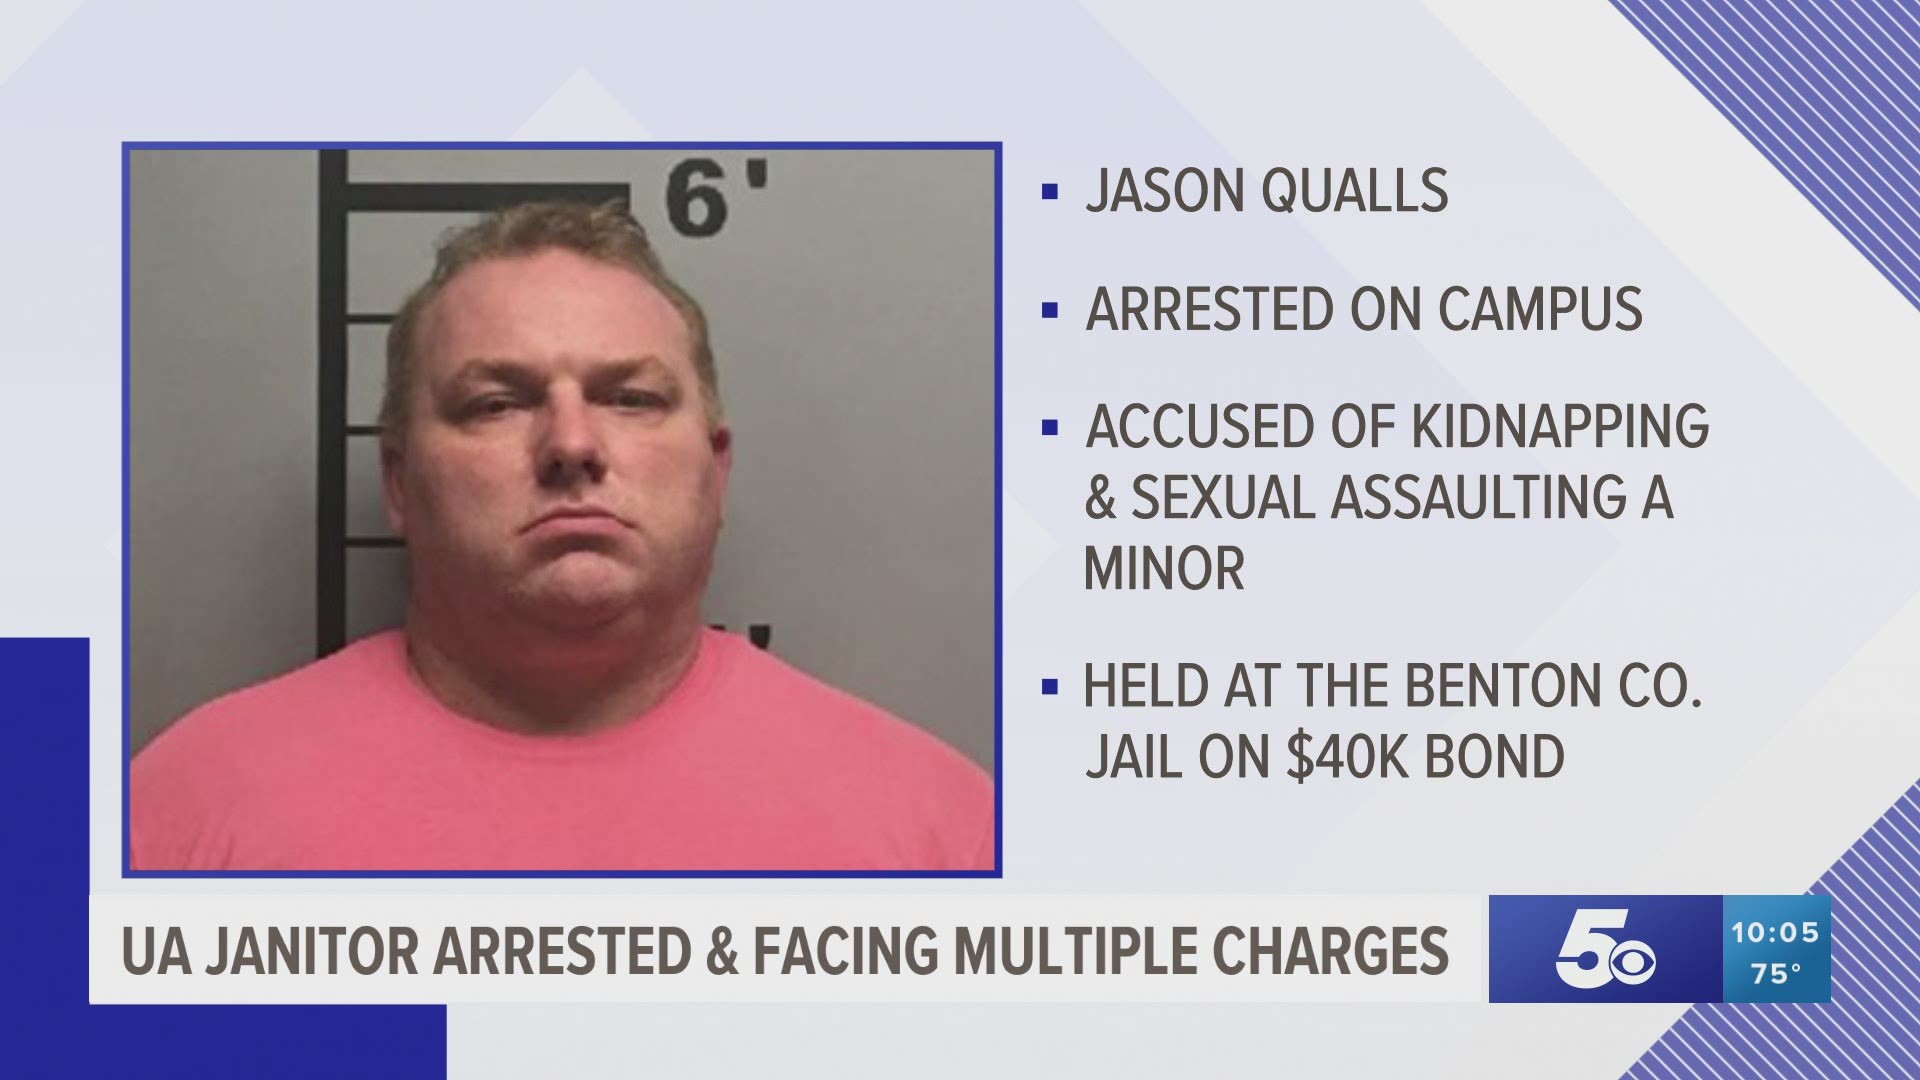 University of Arkansas janitor arrested on sexual assault, kidnapping charges